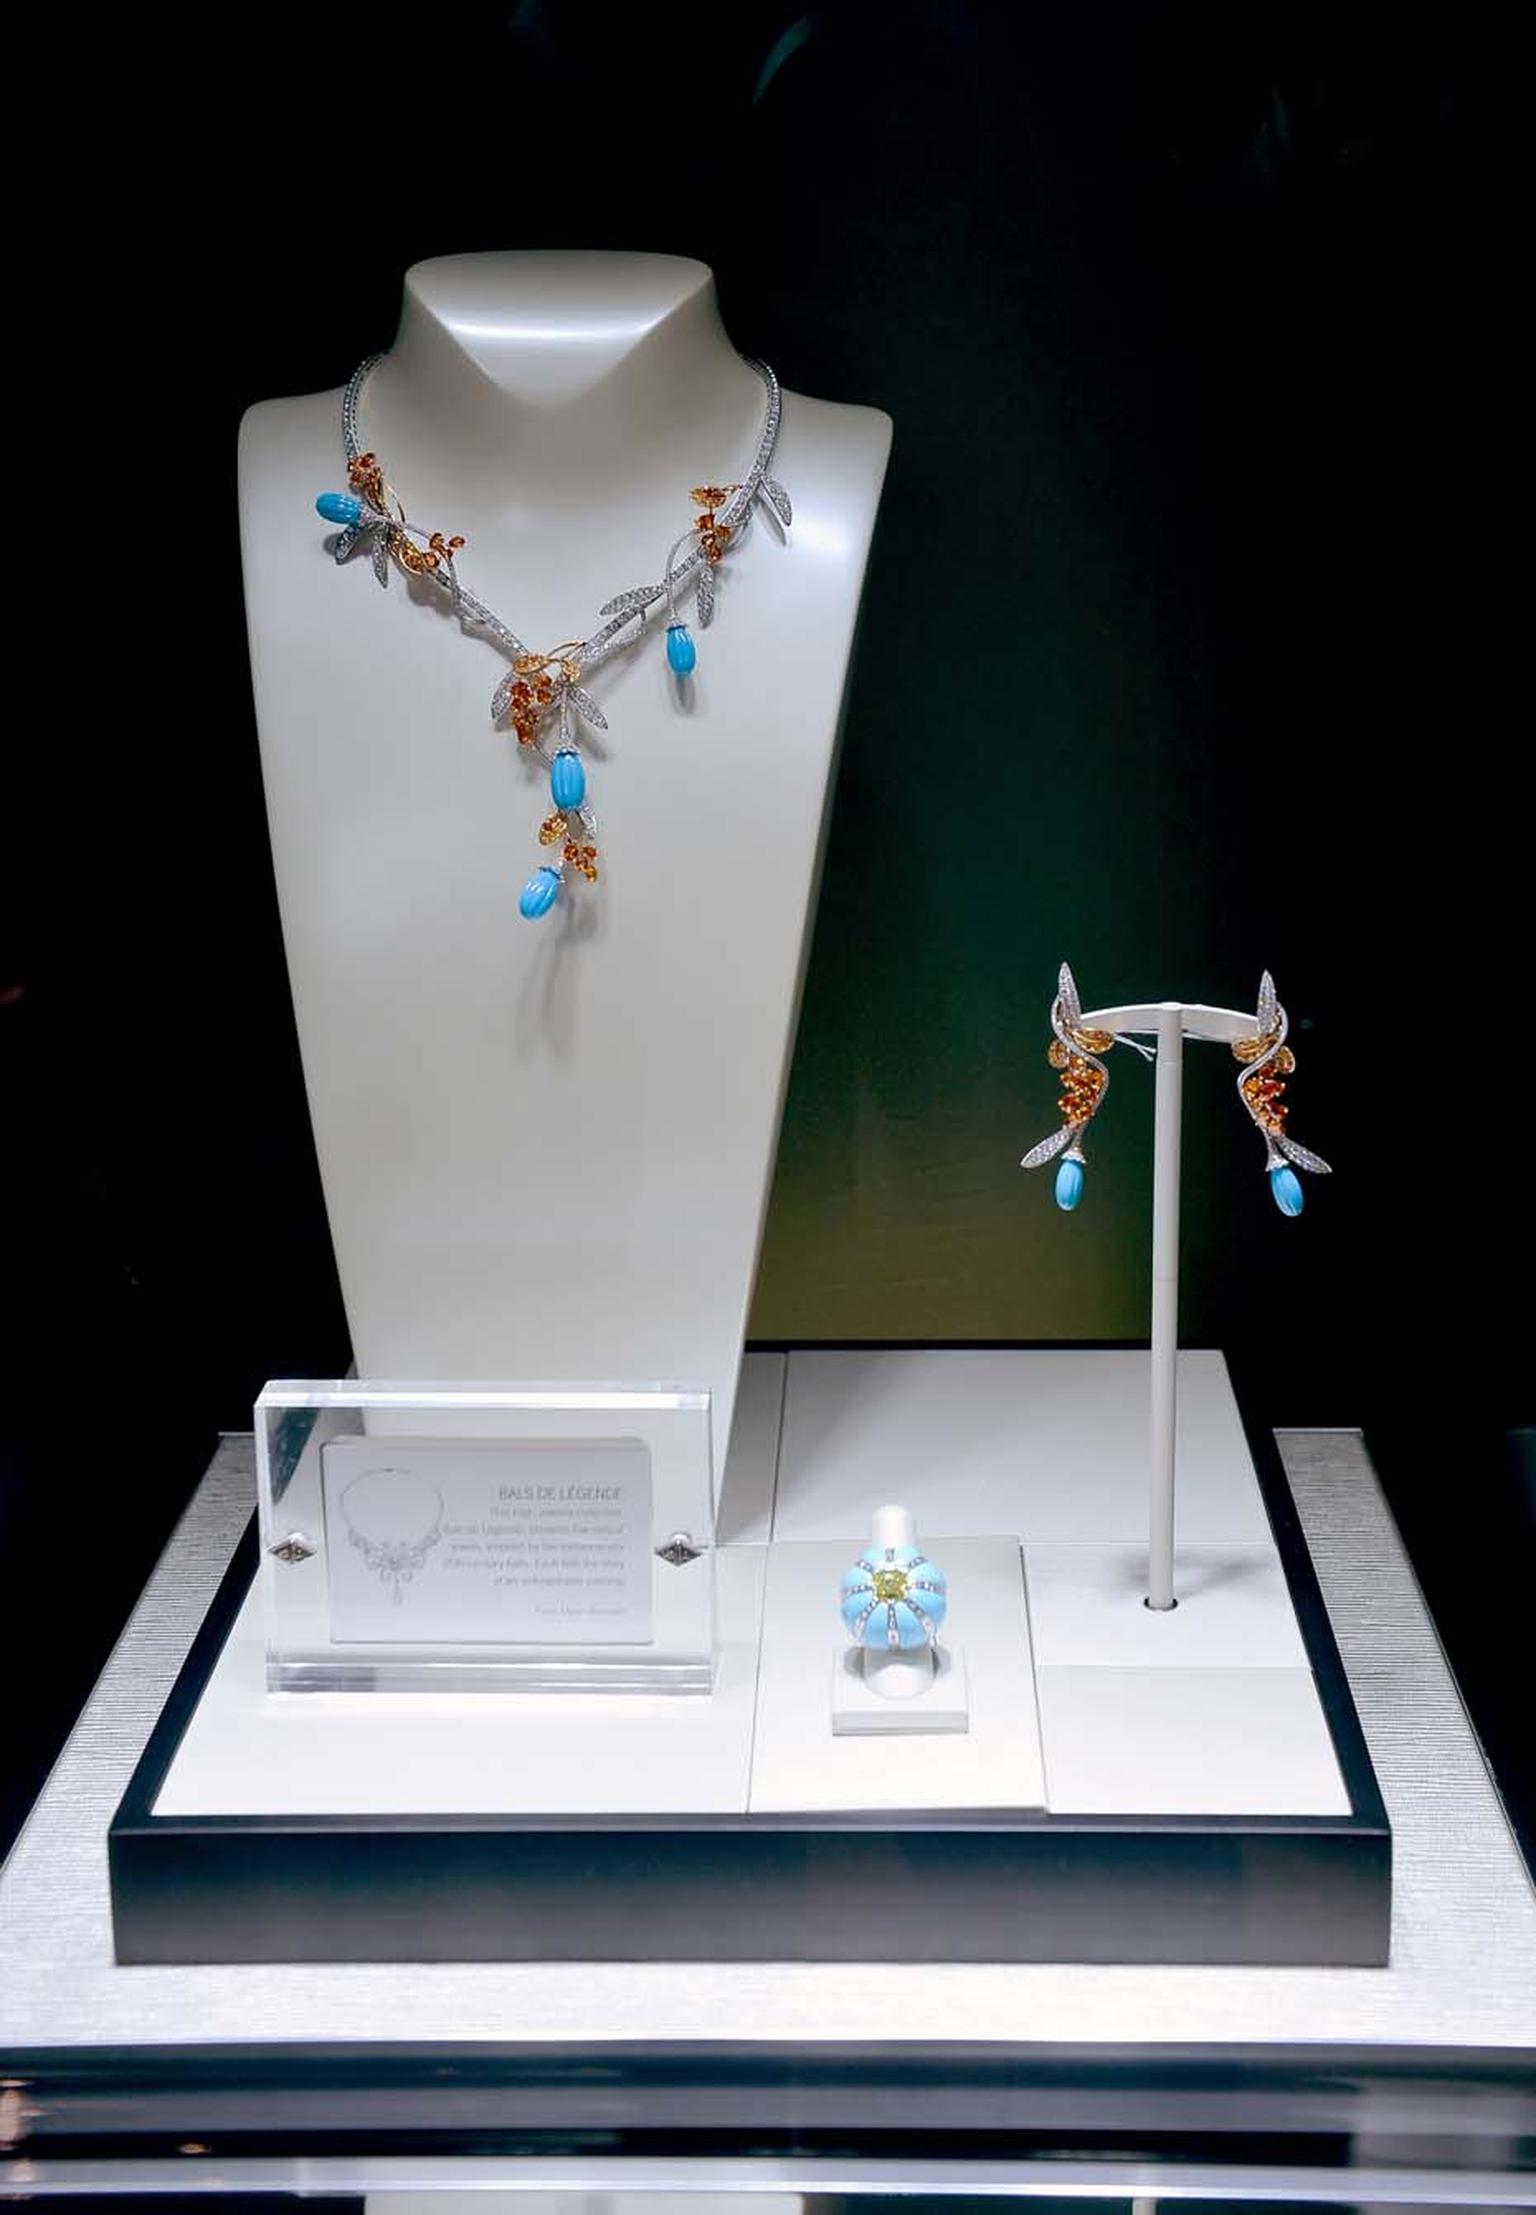 More Van Cleef & Arpels Pierres de Caractère high jewellery, this time on display: a beautiful Bals de Légende turquoise necklace, earrings and ring